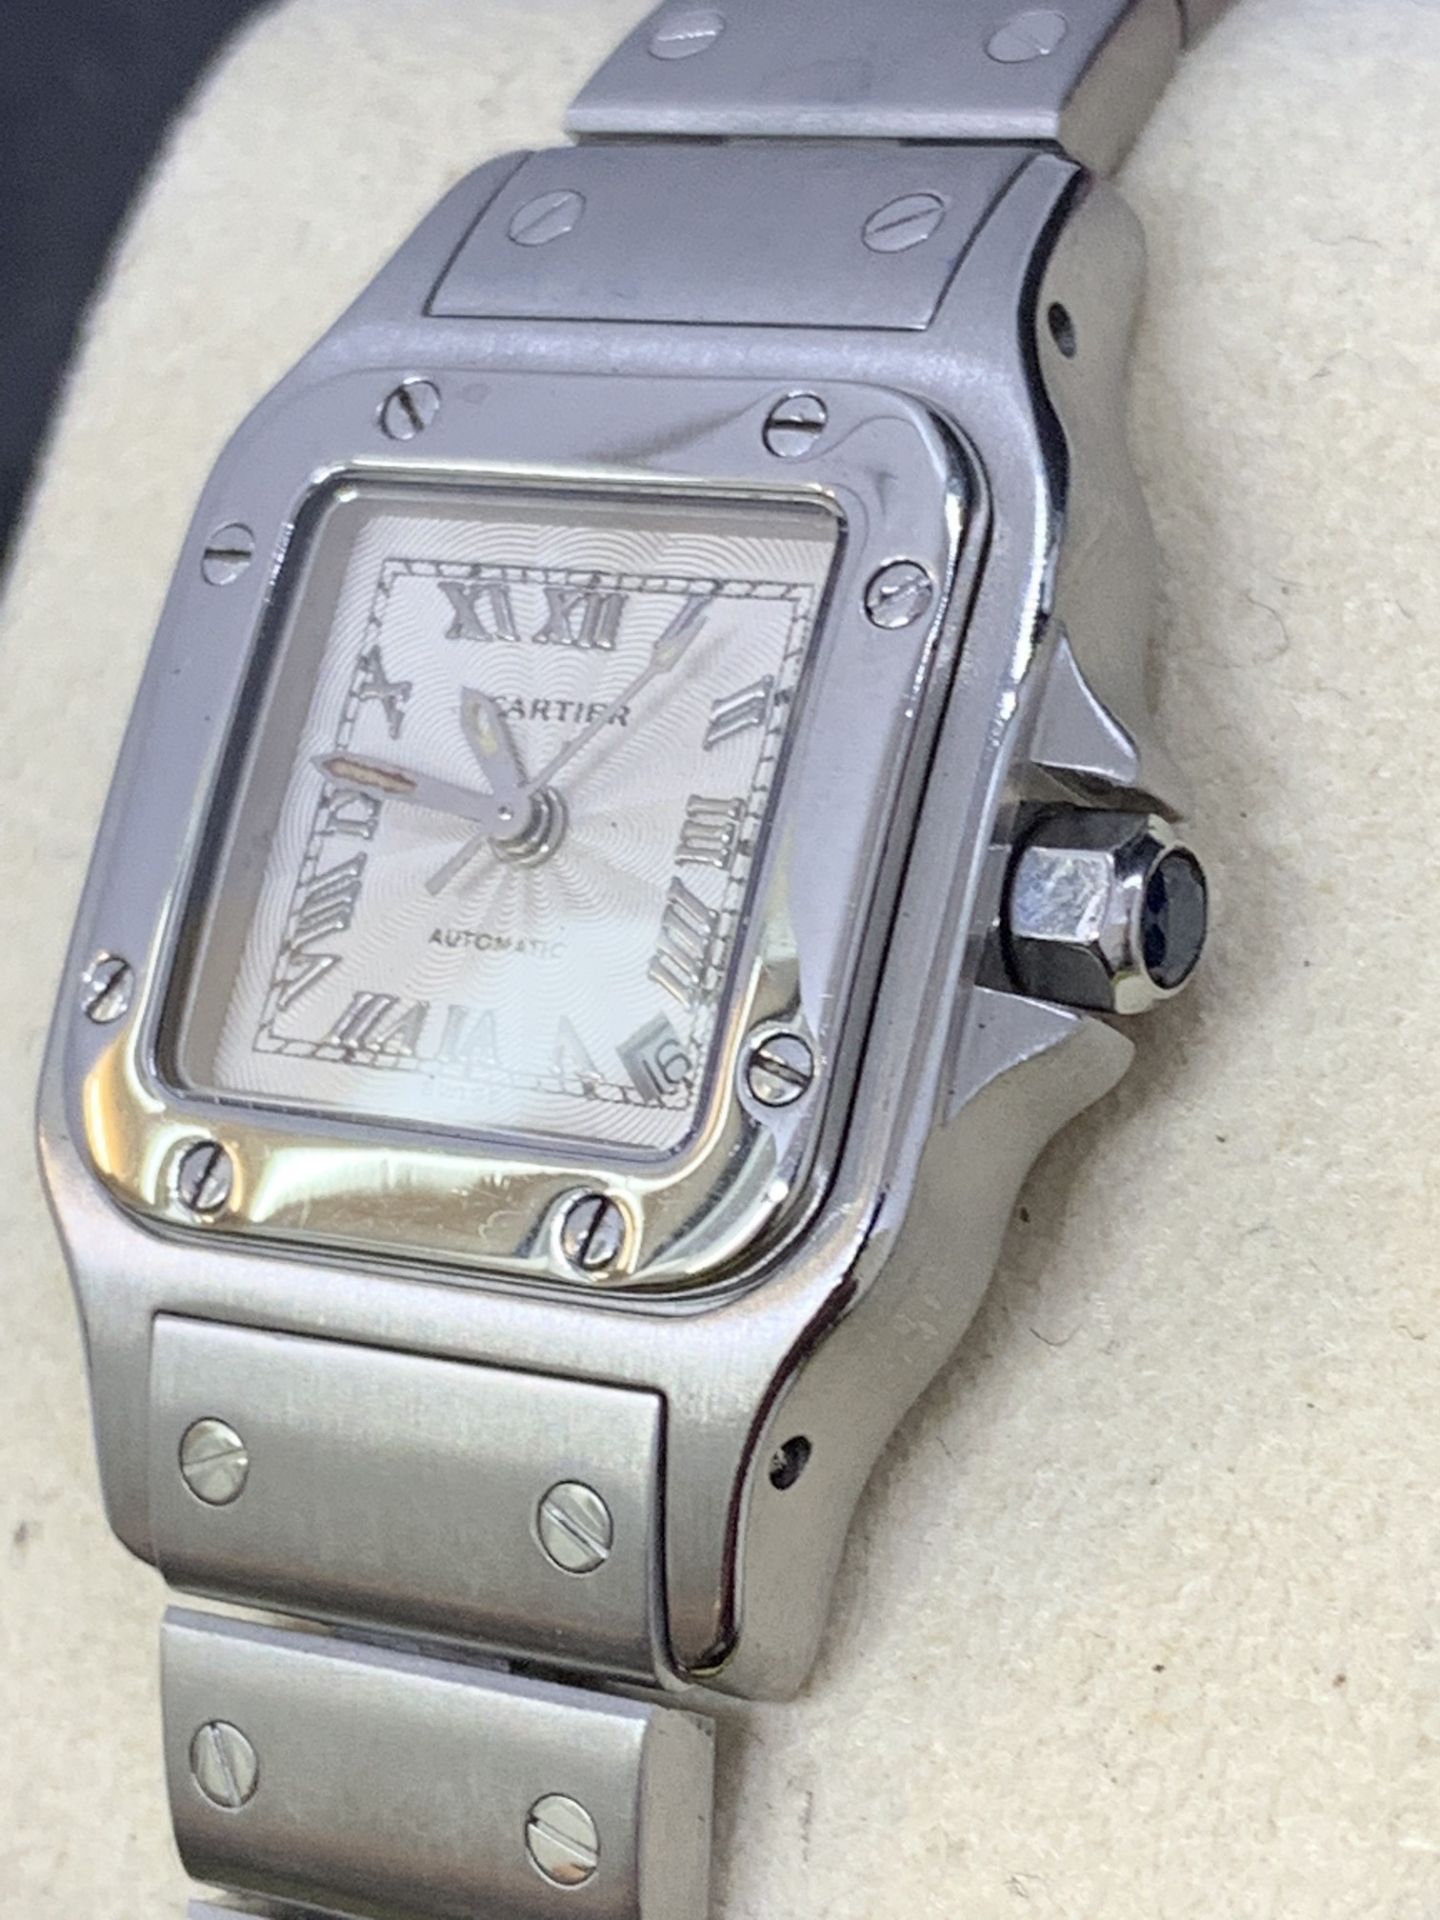 CARTIER SANTOS AUTOMATIC WATCH - Image 4 of 11